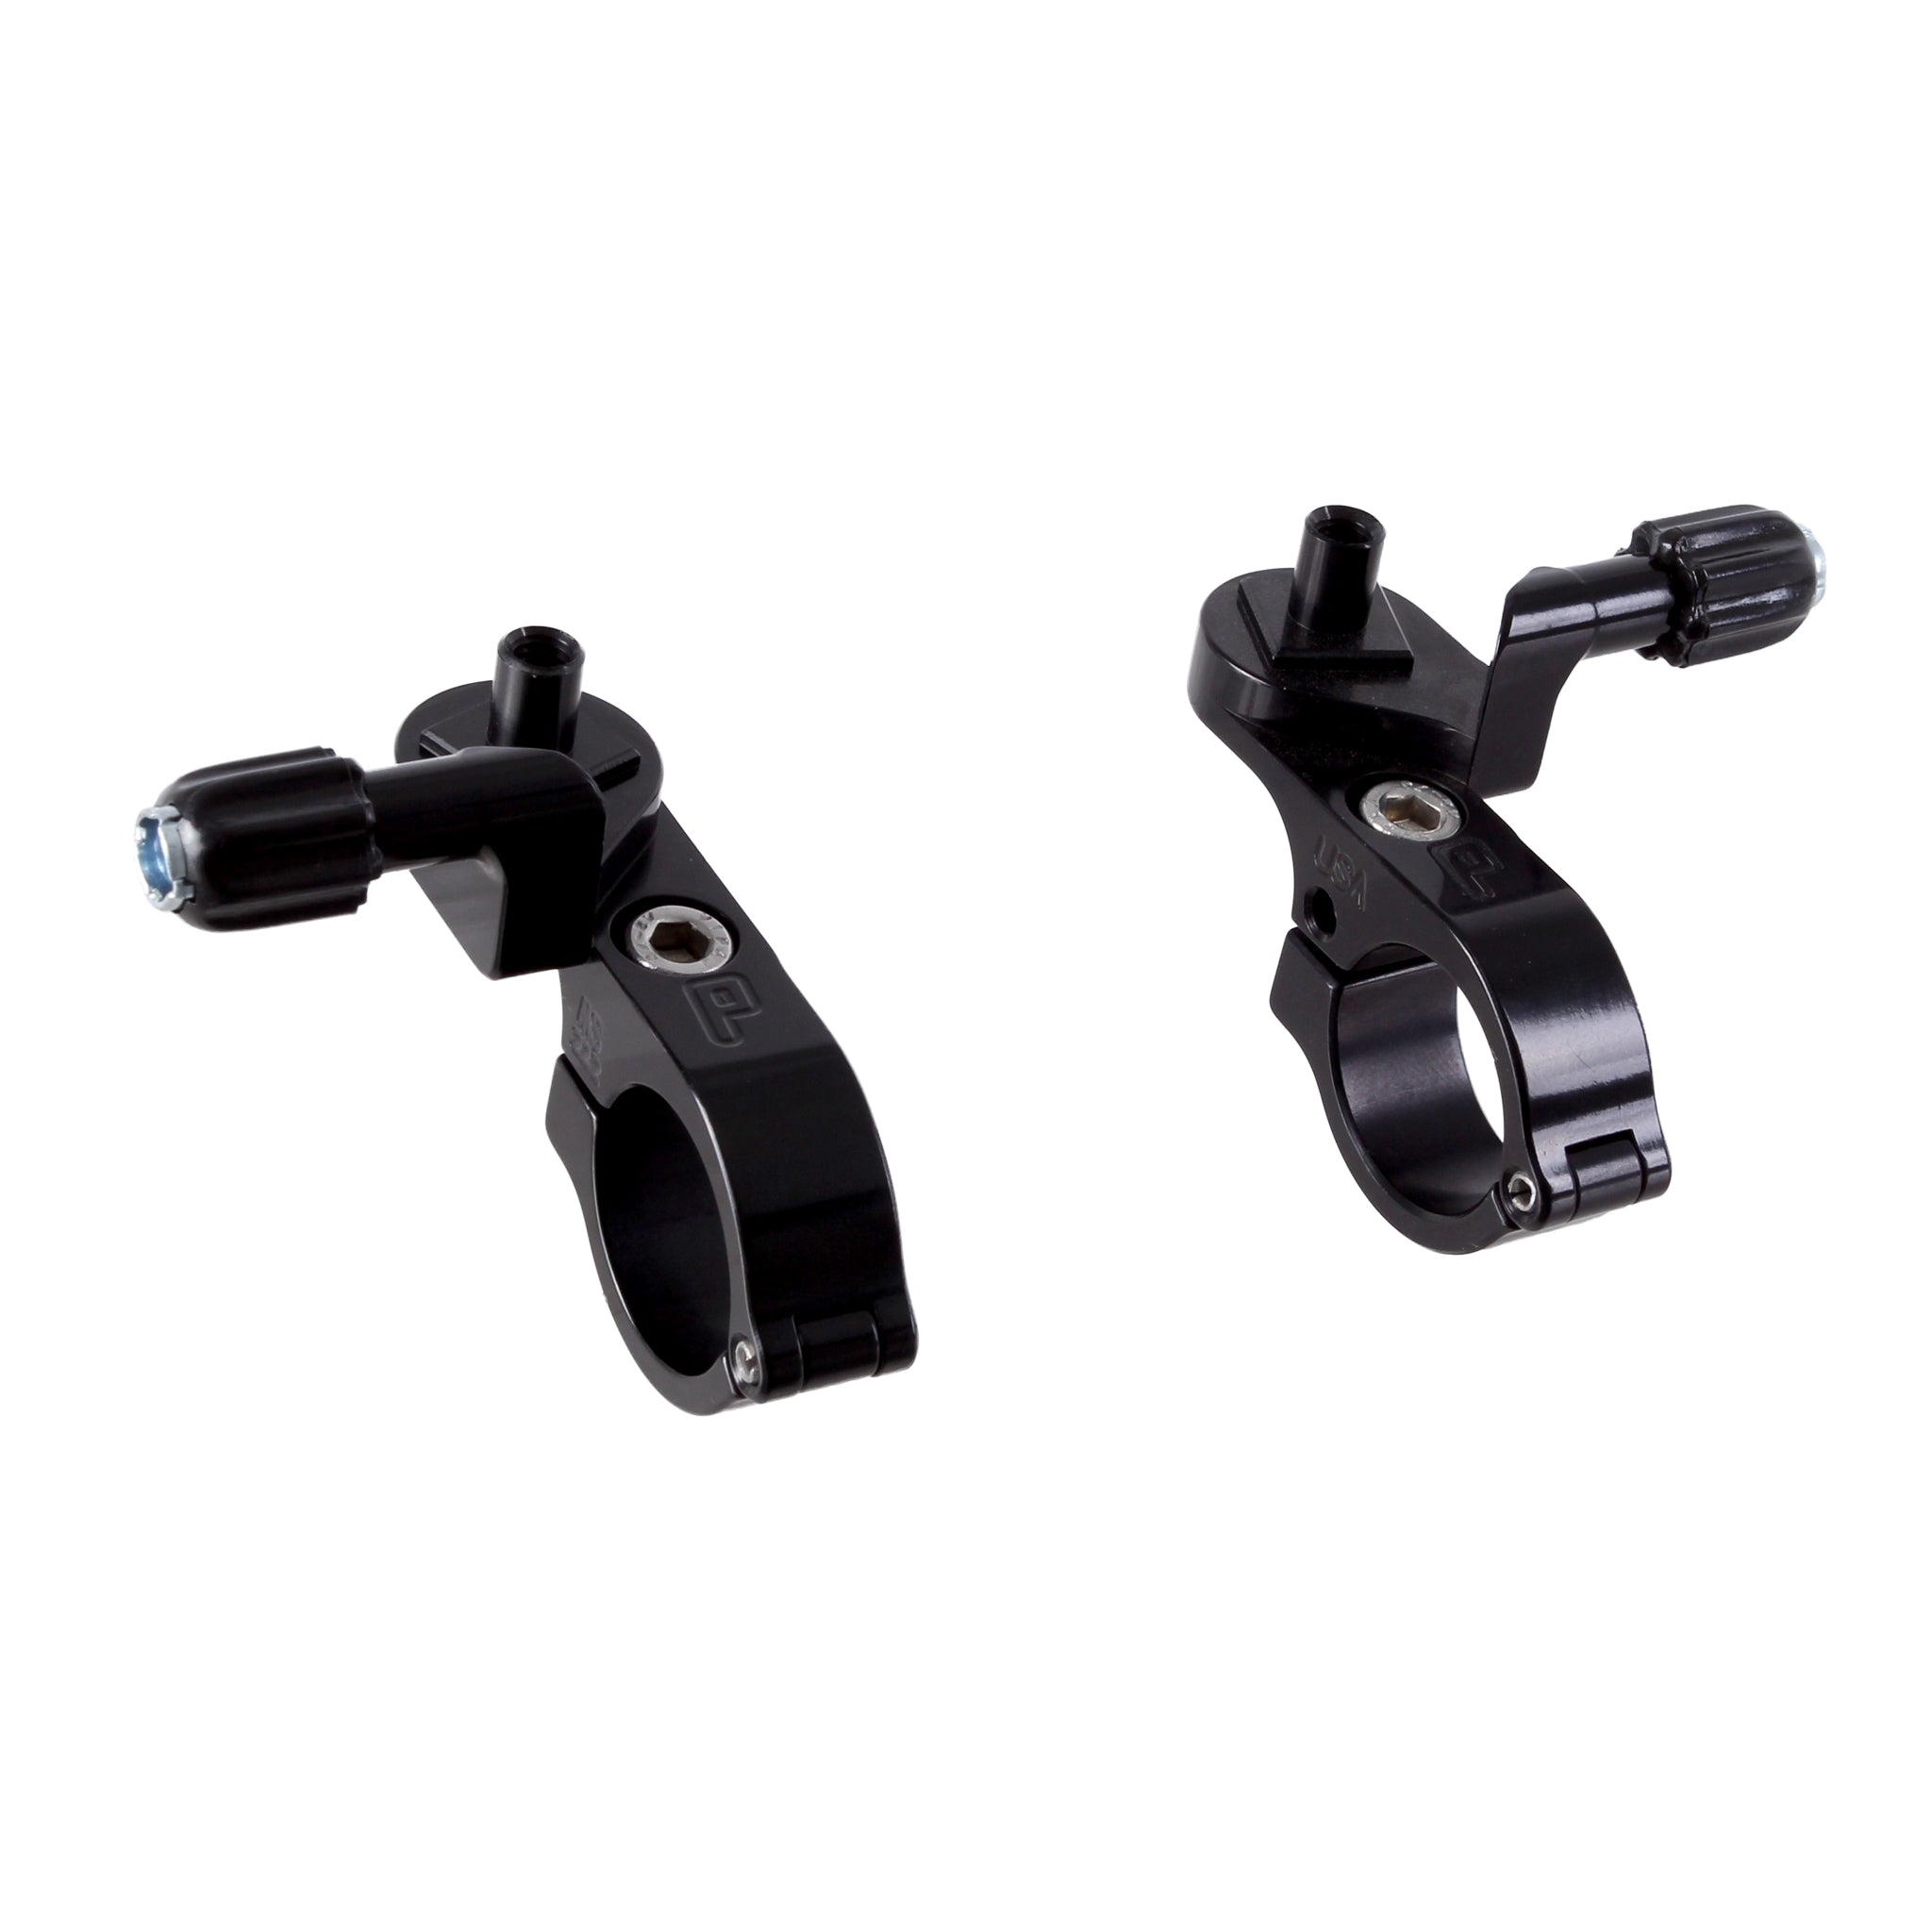 Paul Components Microshift Thumbies Shifter Mounts 31.8mm Black Pair